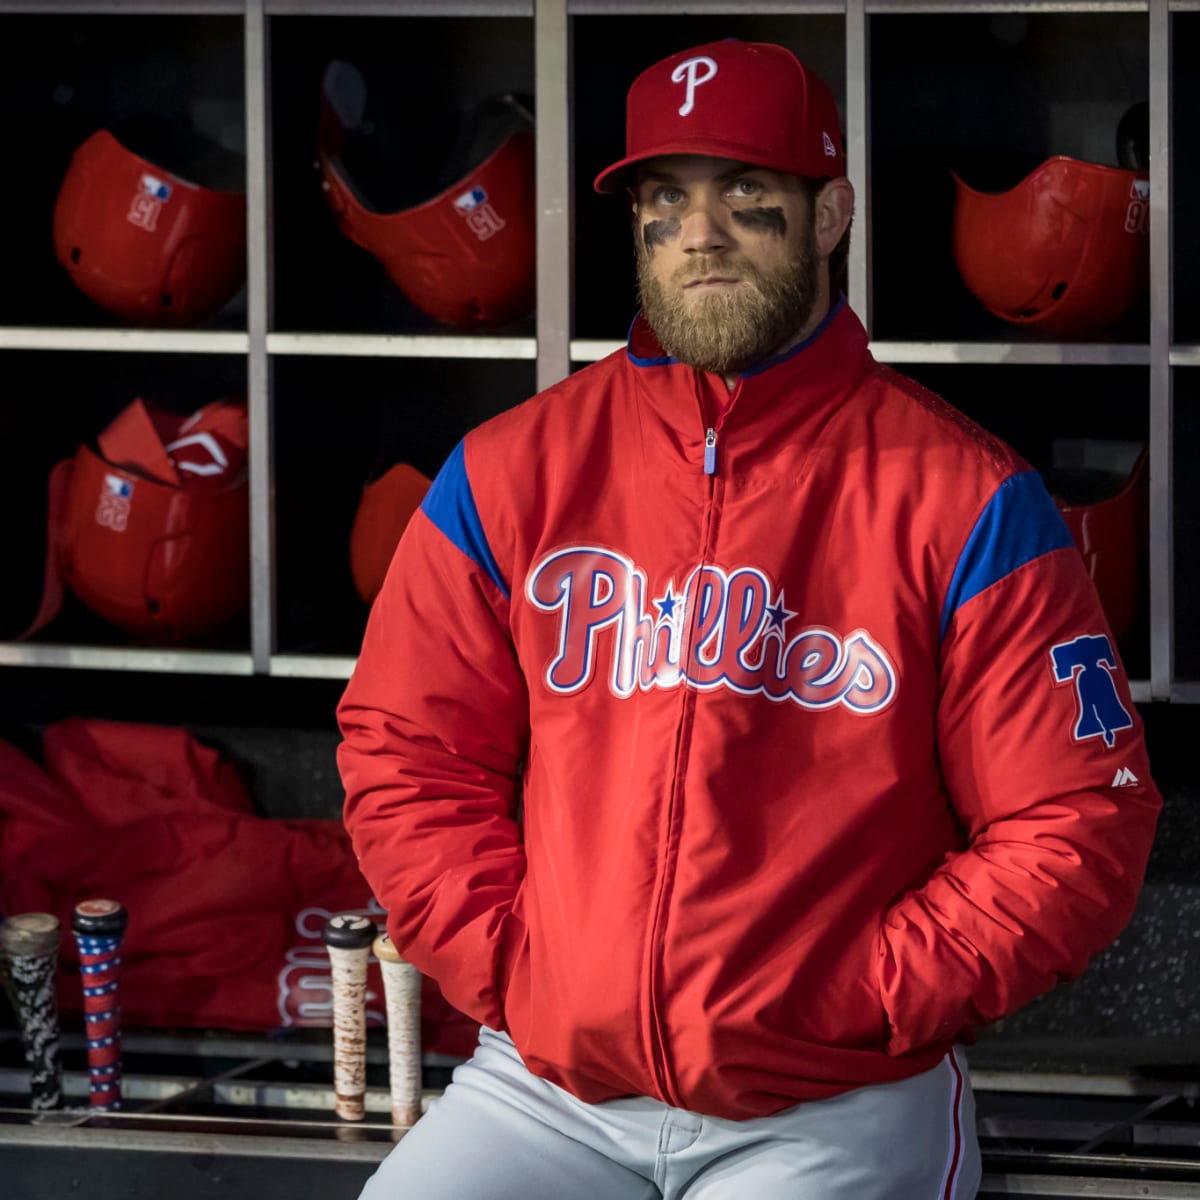 Nationals fans are conflicted about Bryce Harper in the World